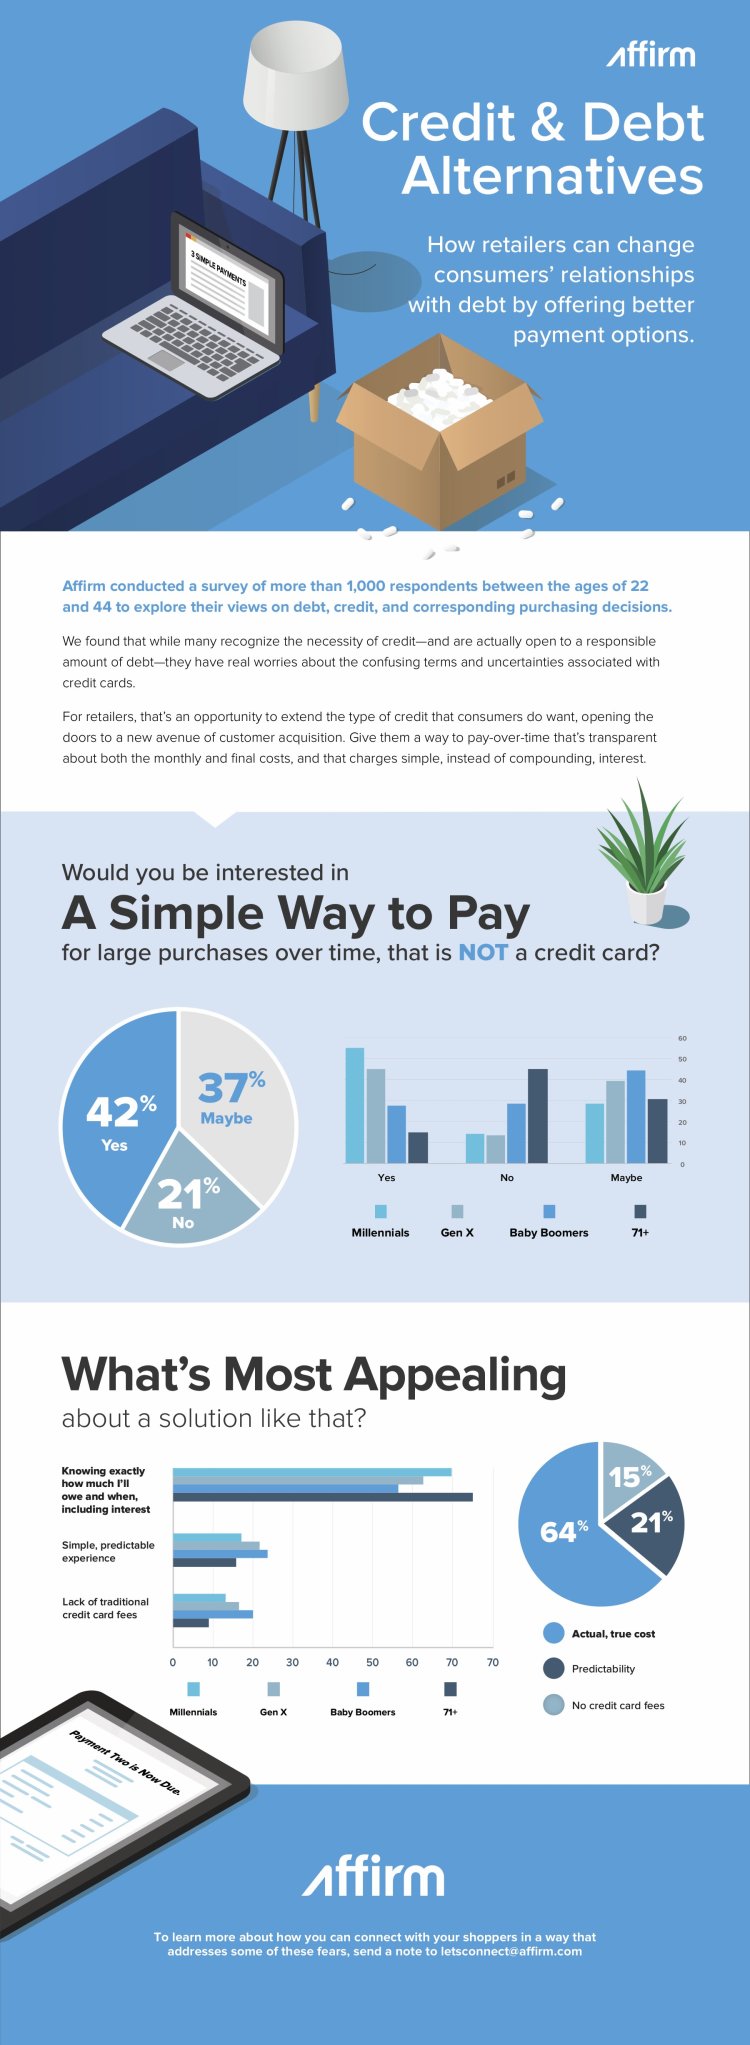 Credit and debit alternatives infographic